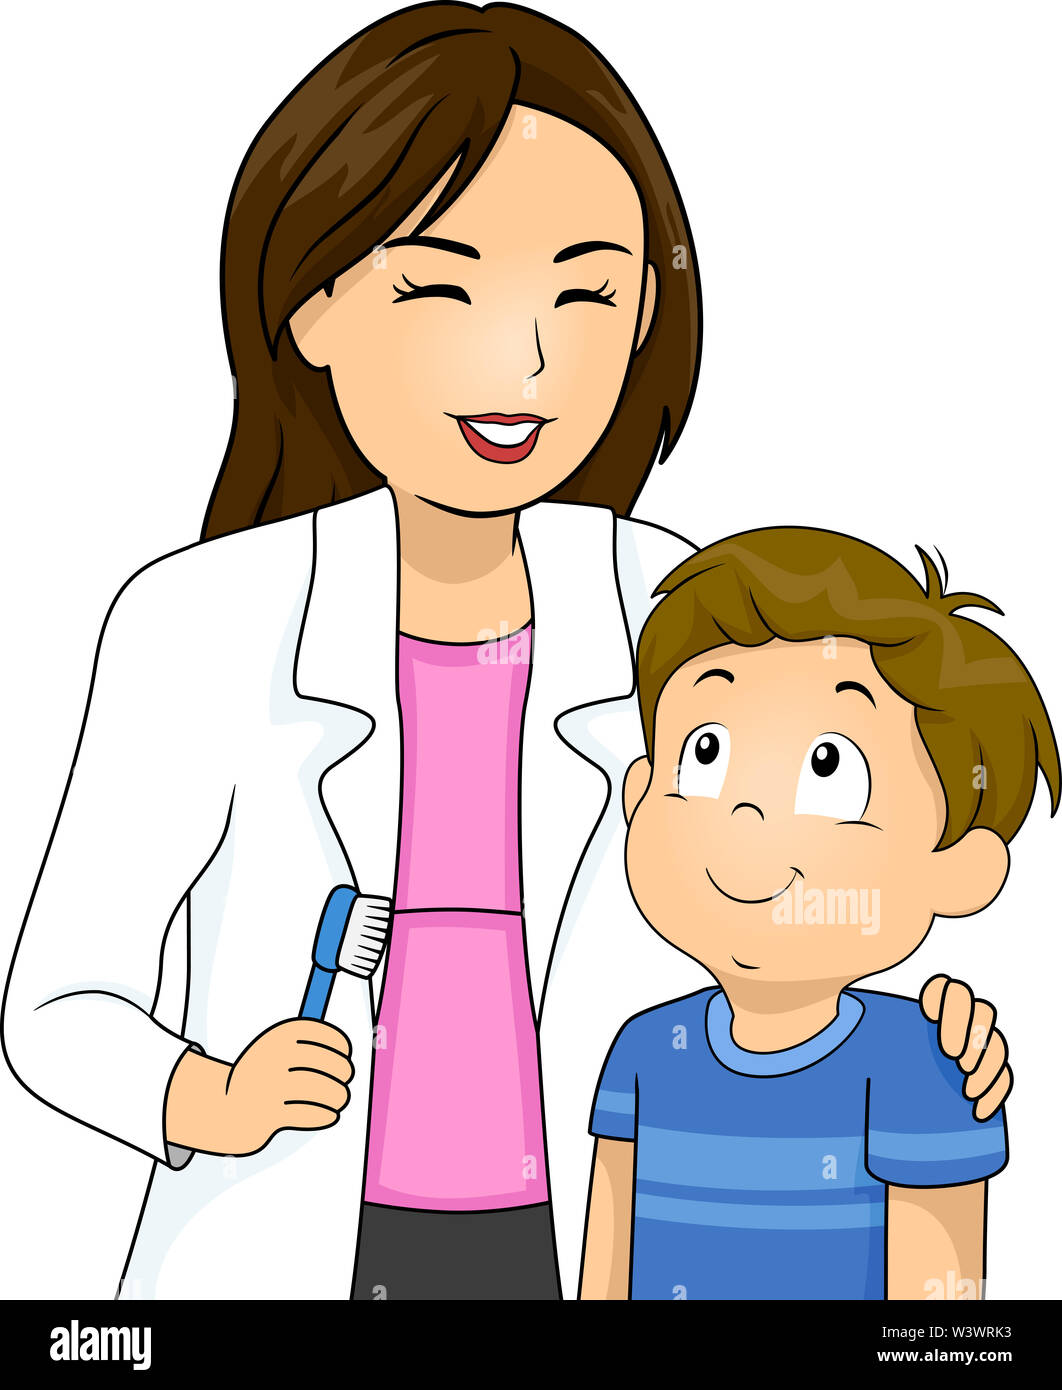 Illustration of a Kid Boy Looking and Listening to the Dentist Holding a Toothbrush Explaining Brushing Teeth Stock Photo